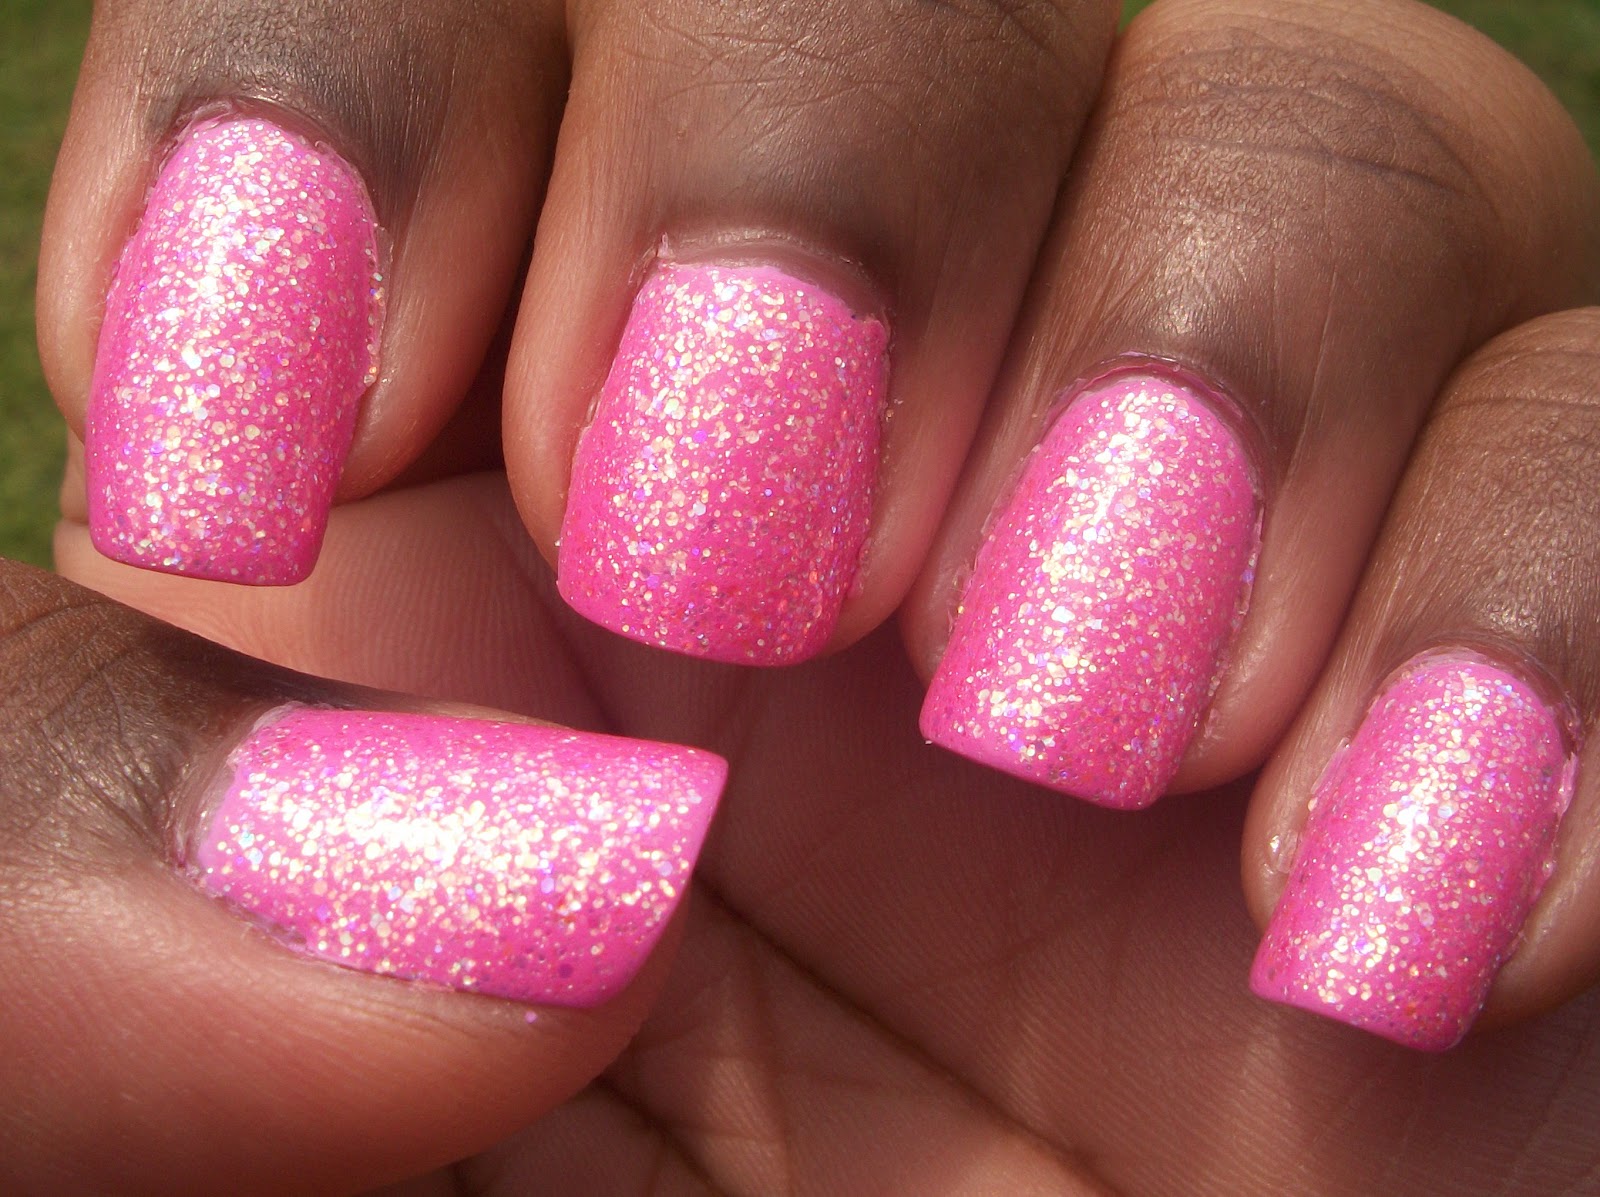 Zoya Nail Polish in Pinky Promise - wide 1